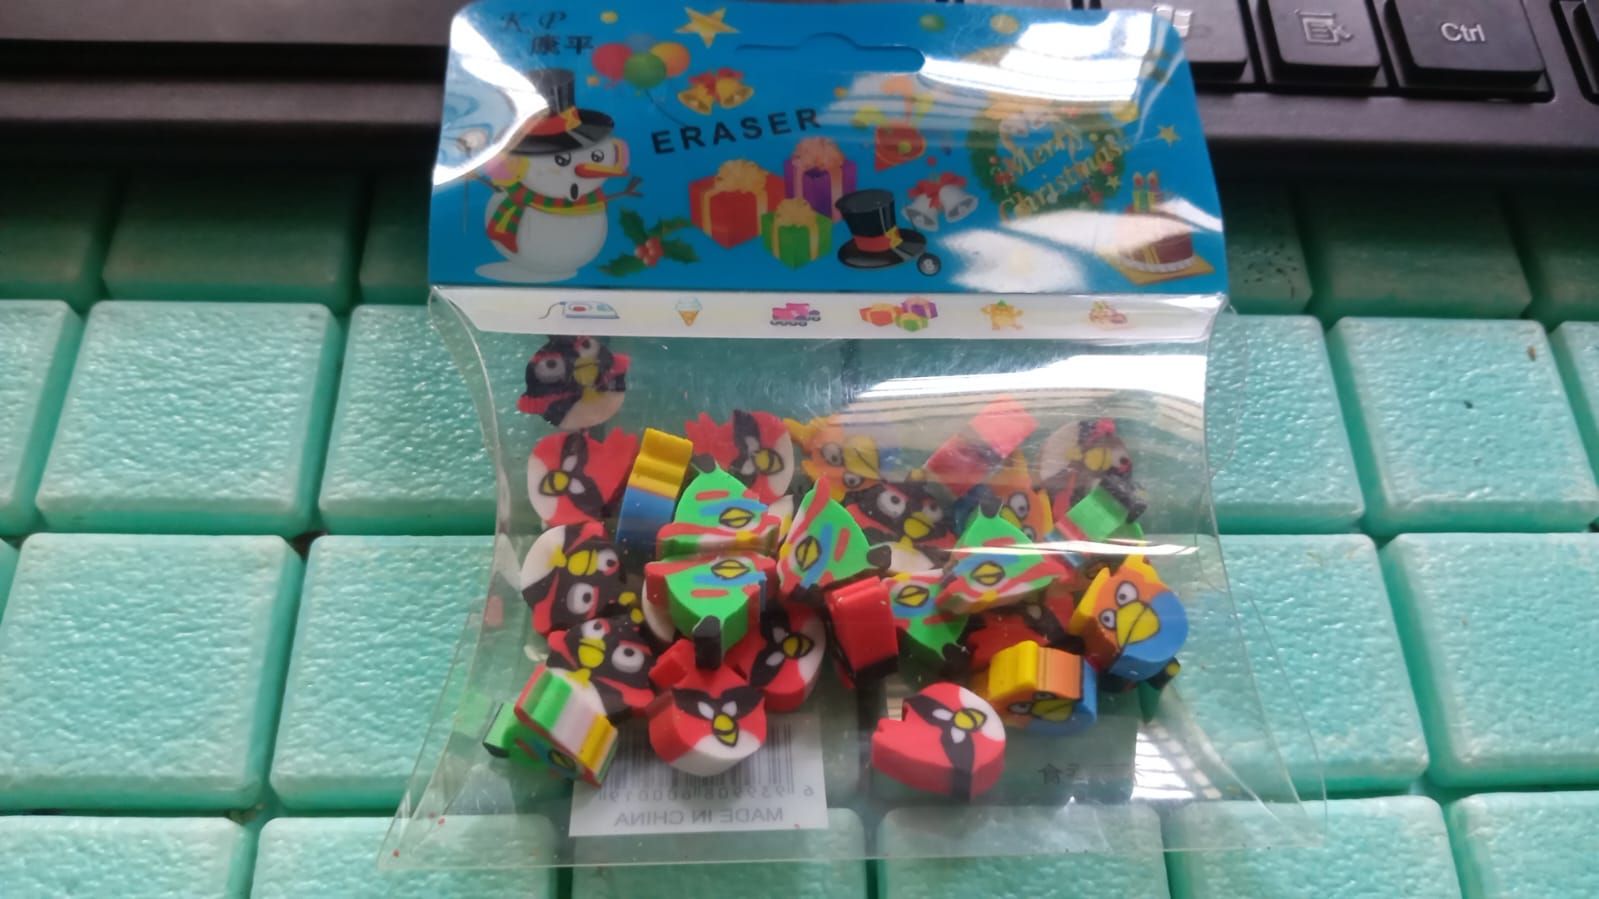 8739 Fancy & Stylish Colorful Erasers, Mini Eraser Creative Cute Novelty Eraser for Children Different Designs Eraser Set for Return Gift, Birthday Party, School Prize (28 Pcs In 1 Packet)